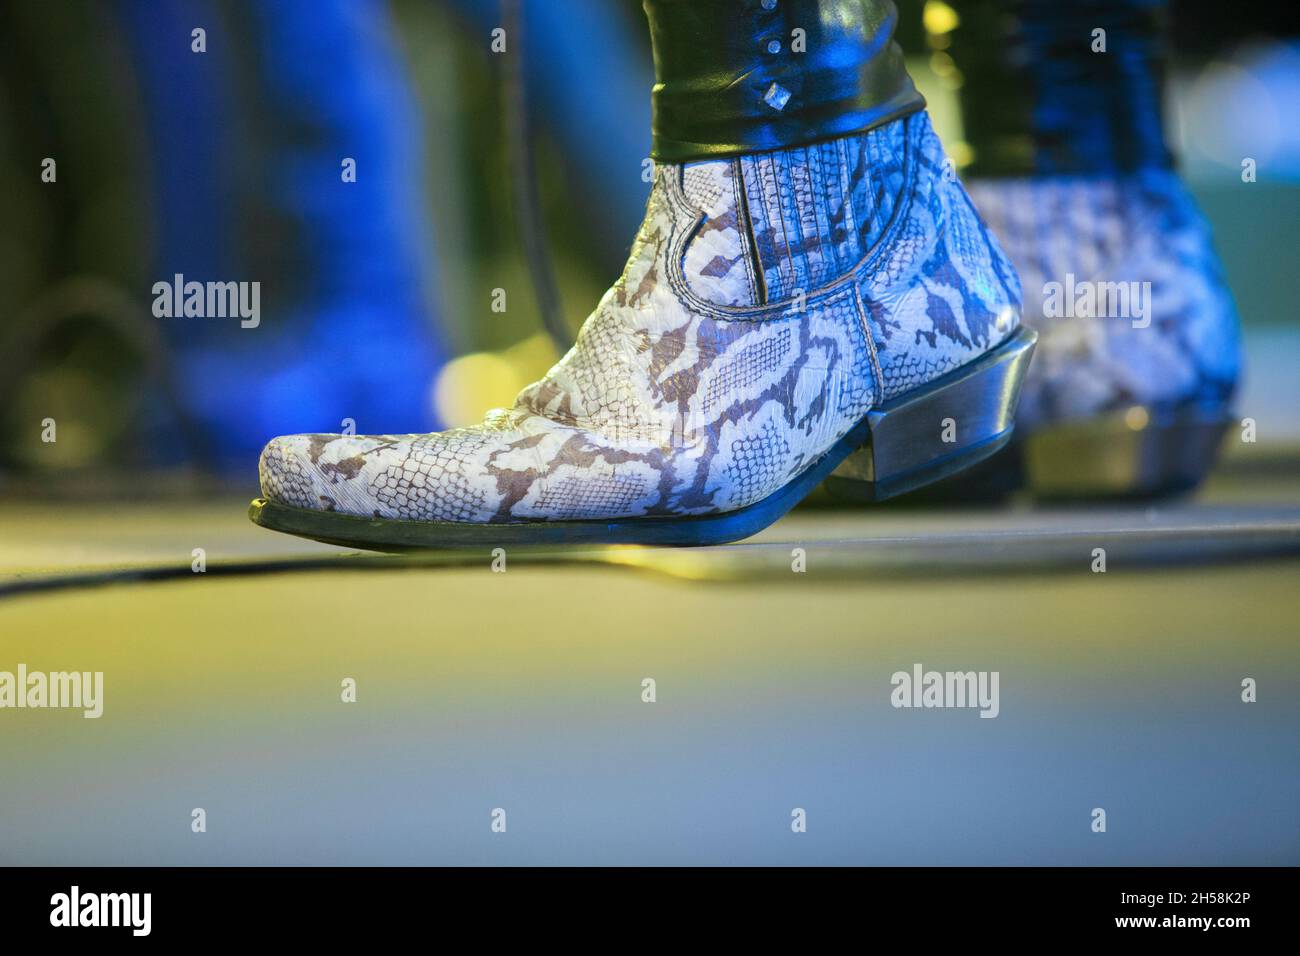 Snakeskin boots on stage. Hard rock musicians performing. Stock Photo